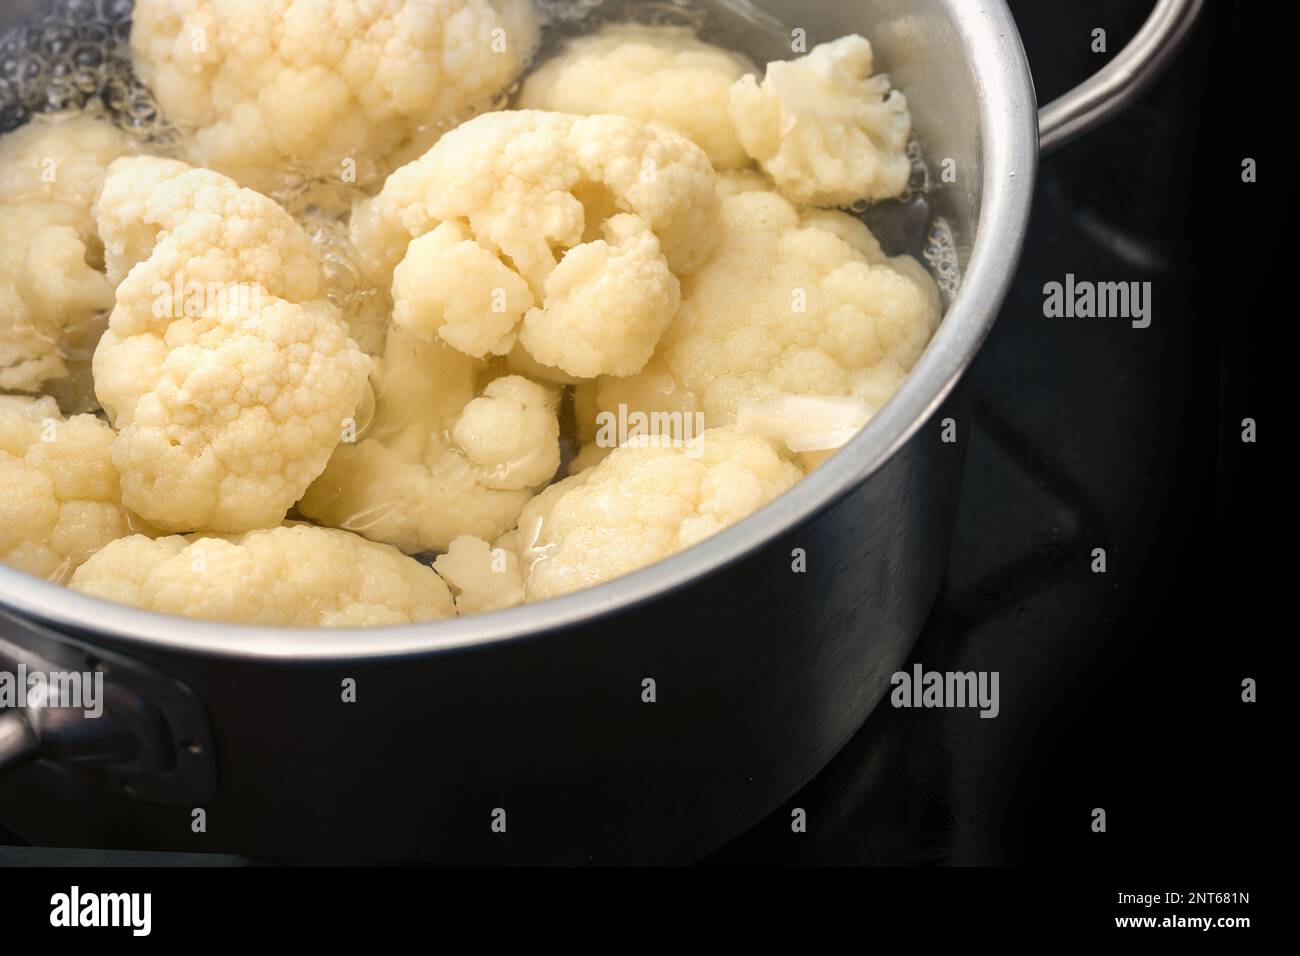 Cauliflower in boiling water in a stainless steel pot on a black cooktop, healthy vegetable cooking, copy space, selected focus, narrow depth of field Stock Photo